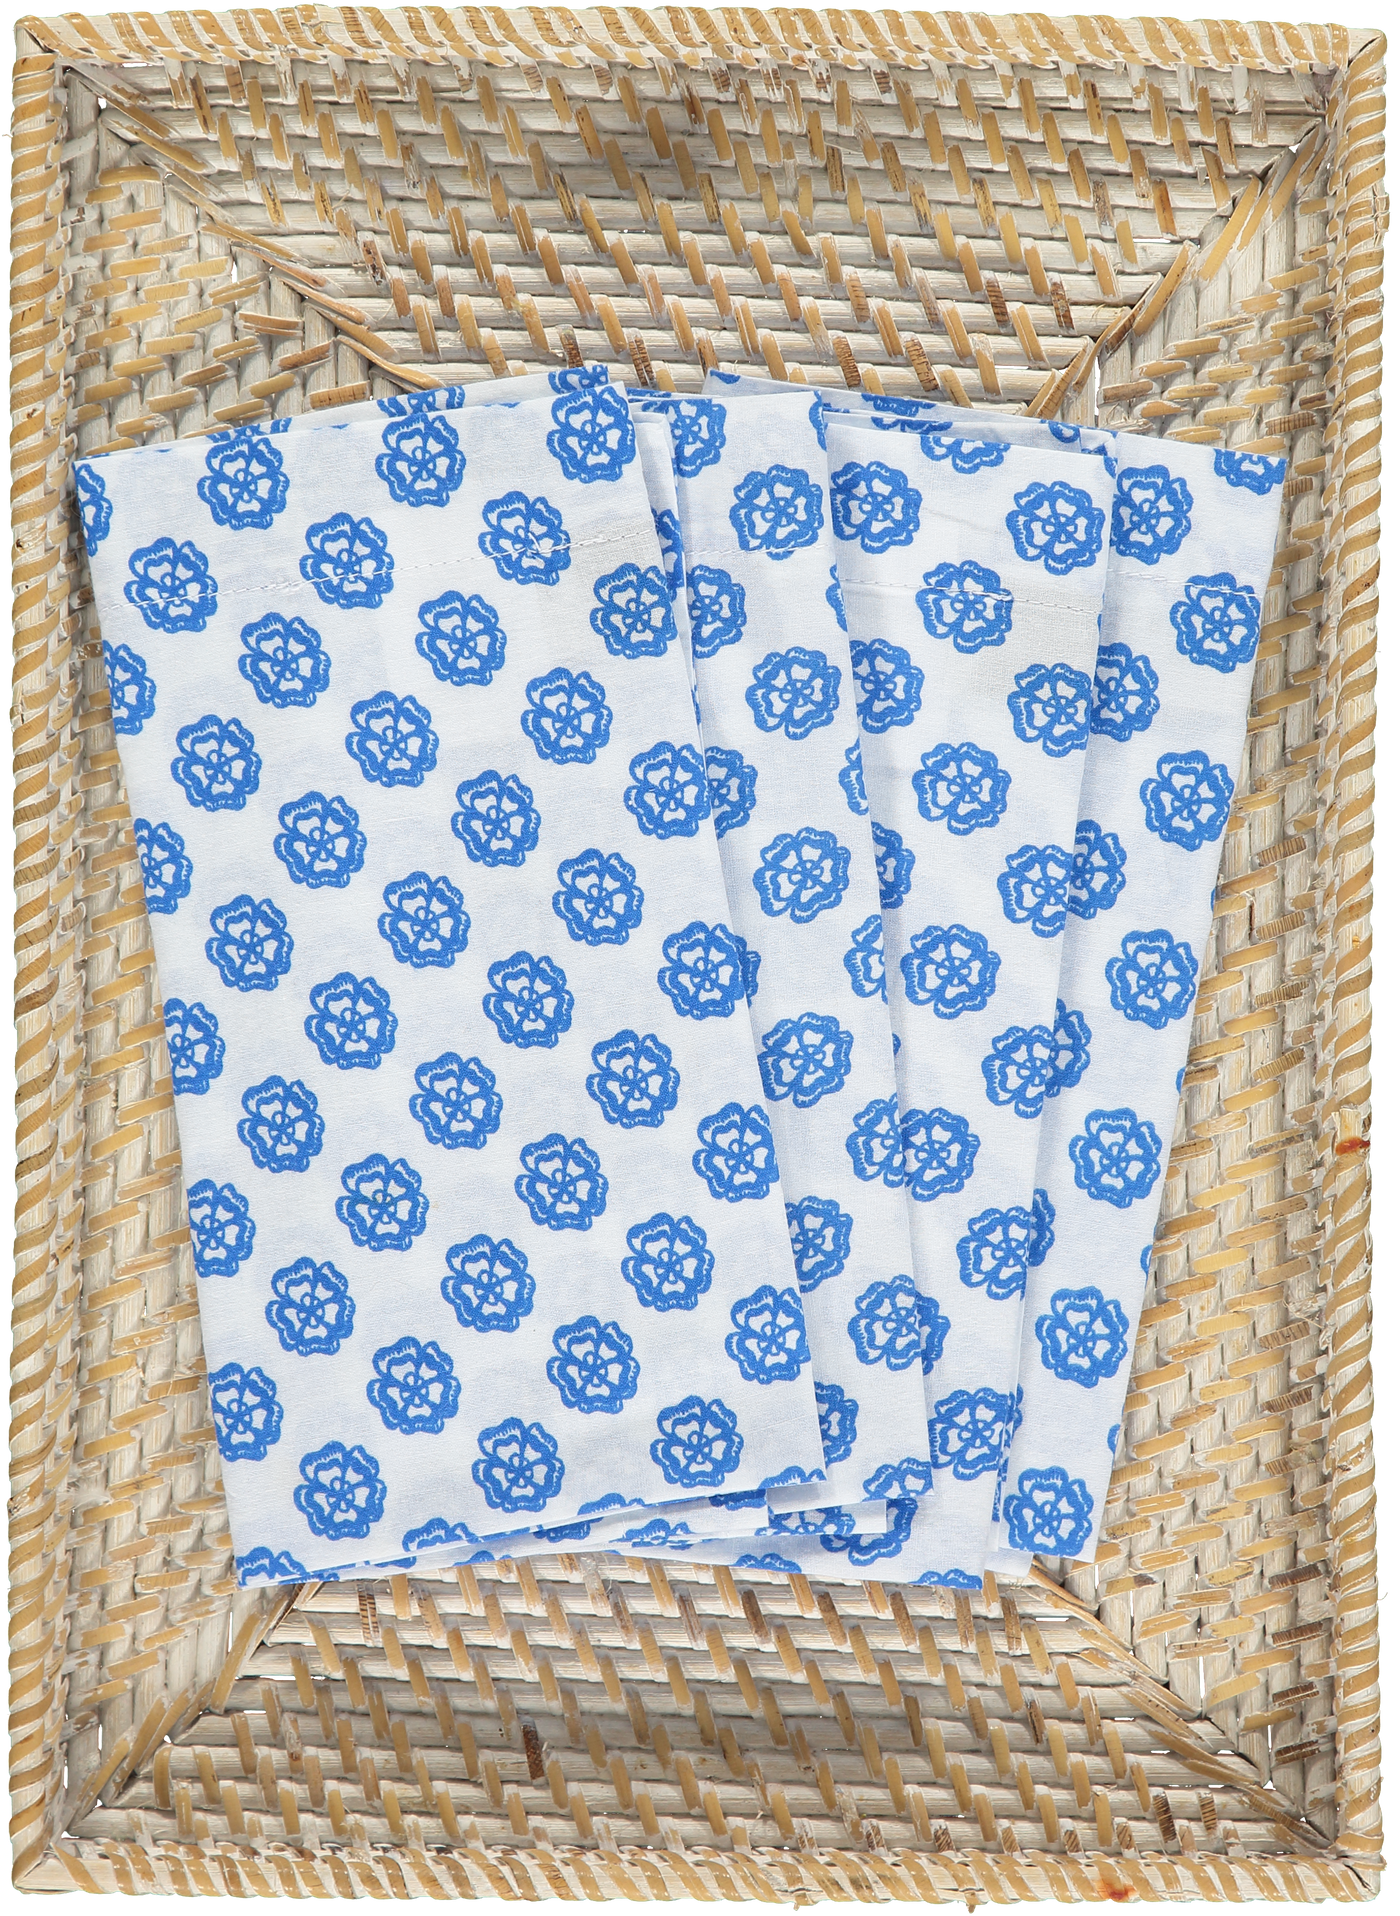 Kitty Holmes Blue and White clover napkins